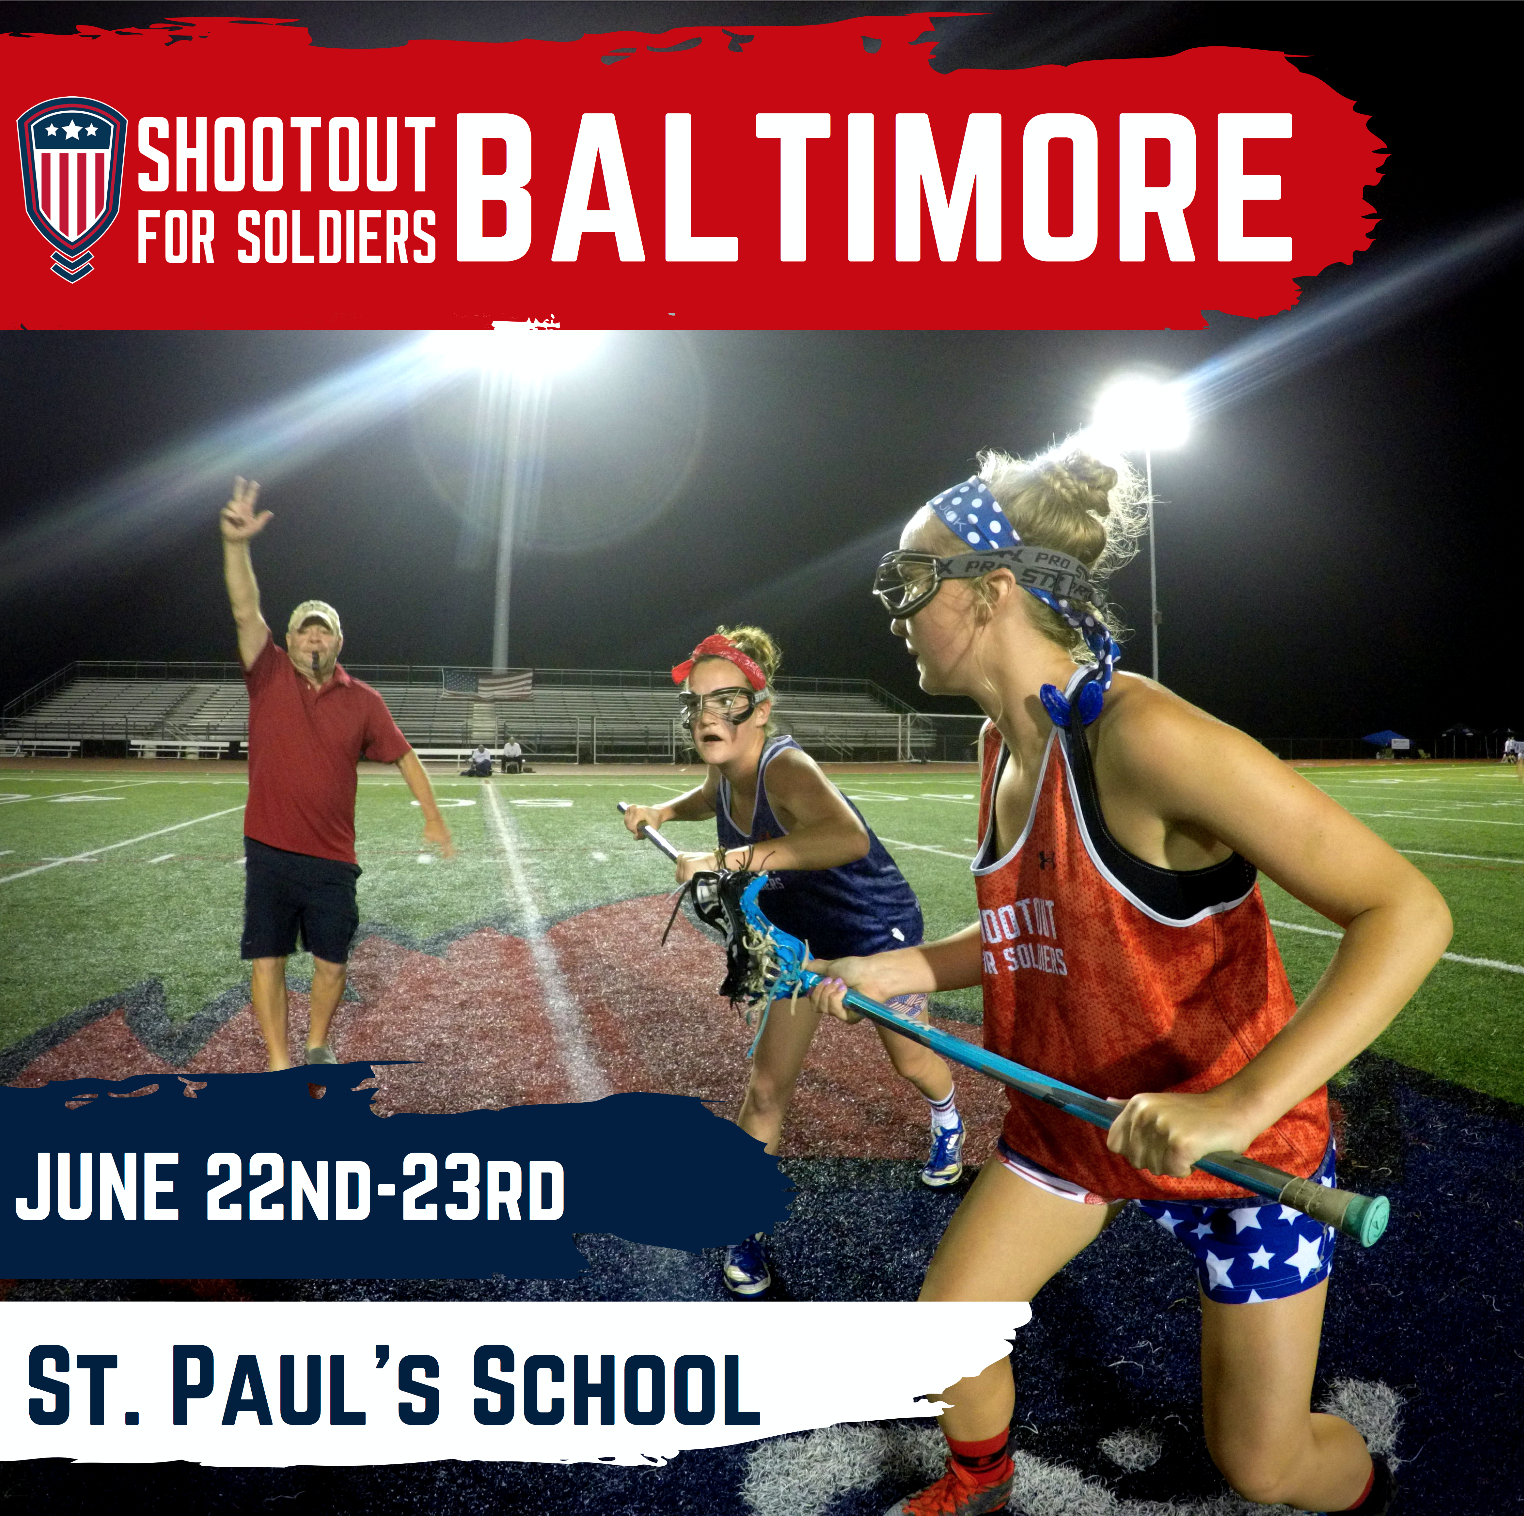 Shootout for Soldiers Baltimore: Official Press Release